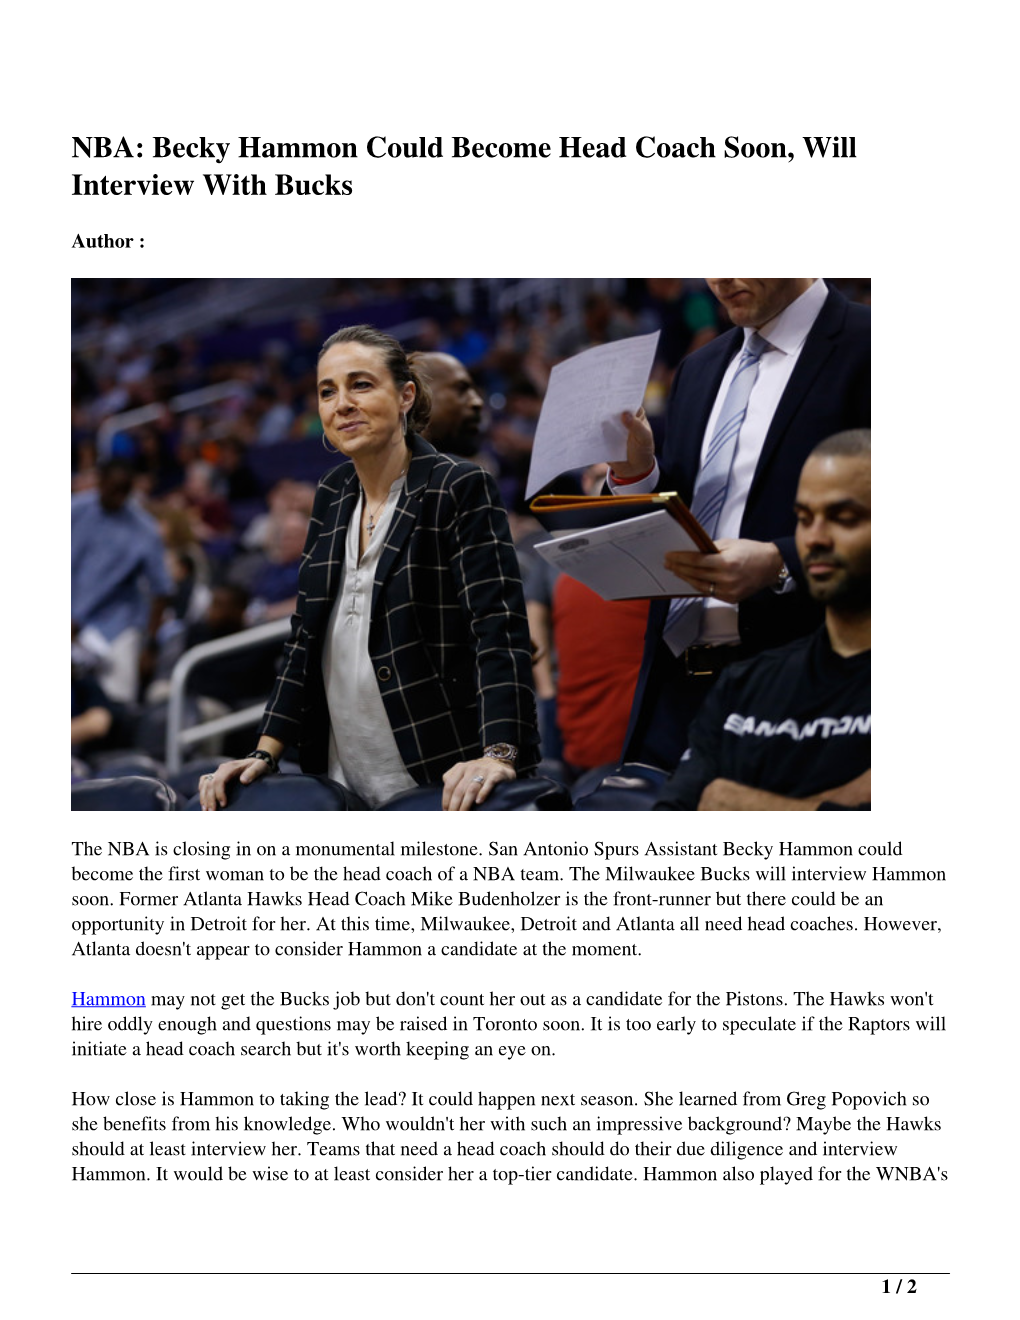 NBA: Becky Hammon Could Become Head Coach Soon, Will Interview with Bucks